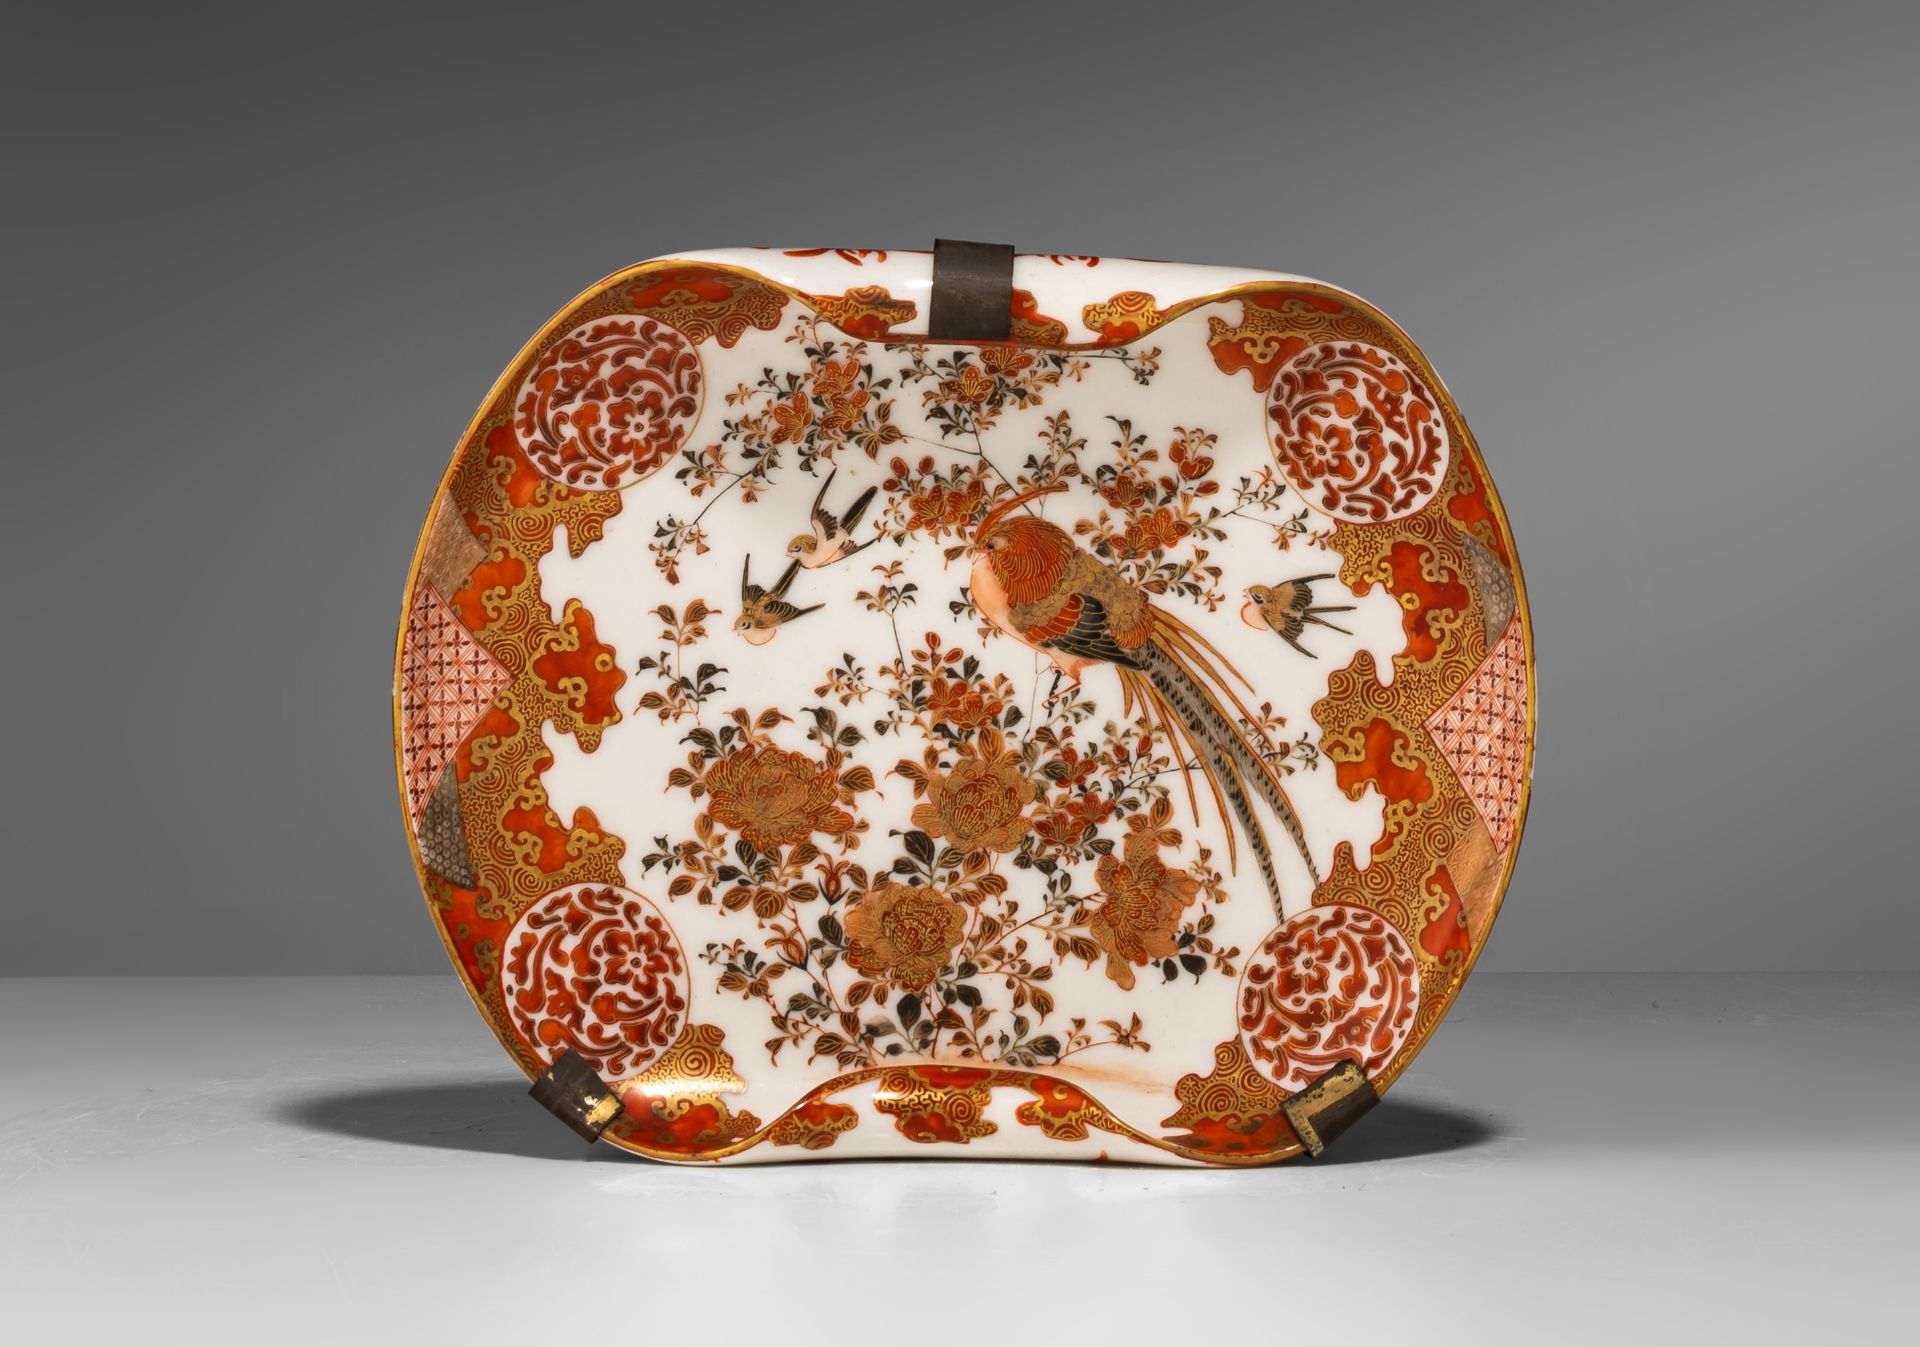 A Japanese Imari charger and a 'Rolled' plate, late 19thC, ø 47,5 (charger) - 22,5 x 18 cm (plate) - Image 4 of 5